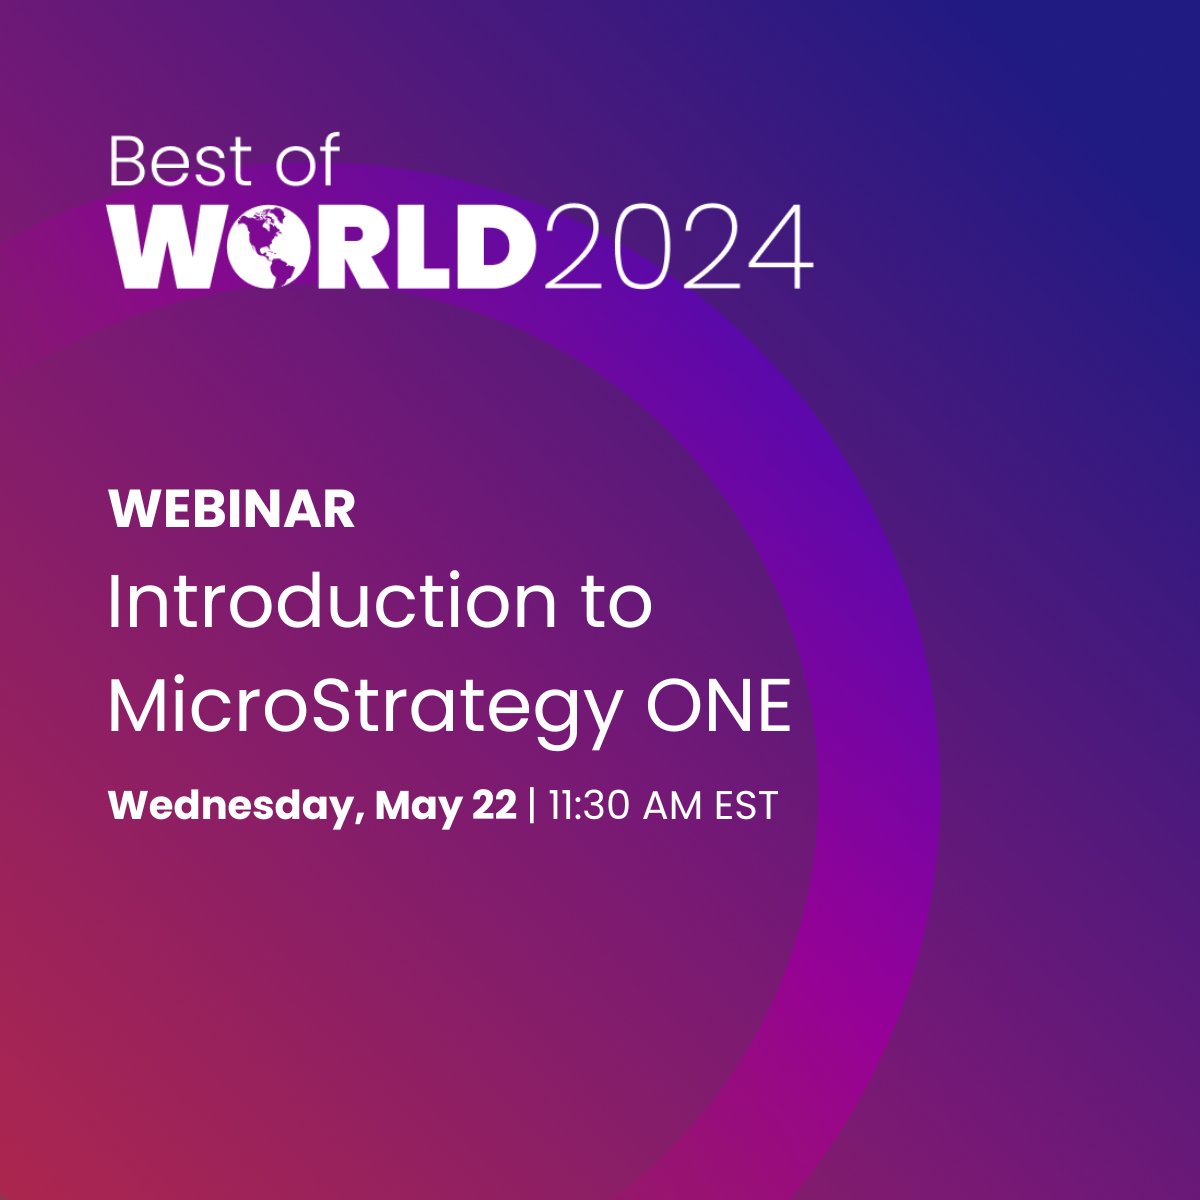 Unlock the power of data intelligence with our #BestOfWorld2024 webinar series! 🚀 Join us next Wednesday at 11:30AM ET for 'Introduction to MicroStrategy ONE.' Discover top use cases and benefits of our #AI + #BI platform. Save your seat ow.ly/JlI150RH9Ui